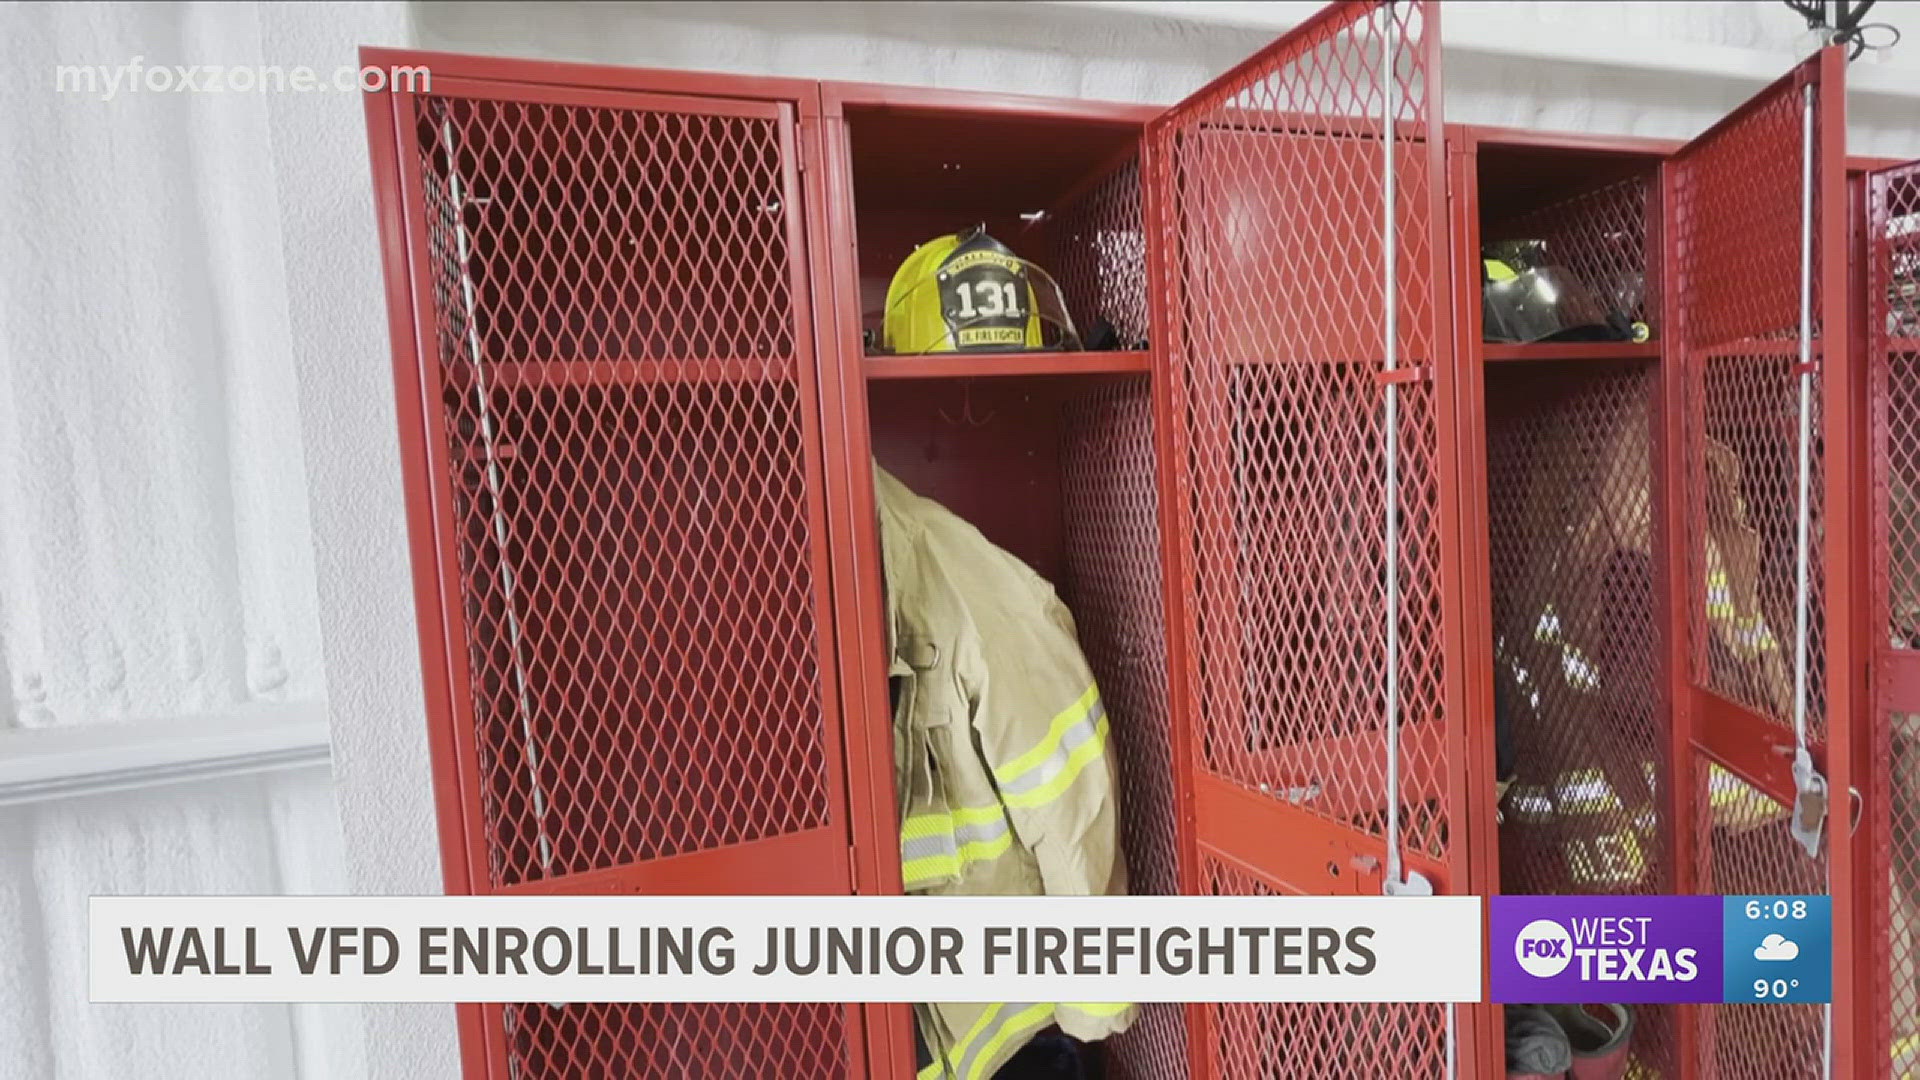 The department hopes high school students who participate will eventually be able to pursue careers in firefighting.